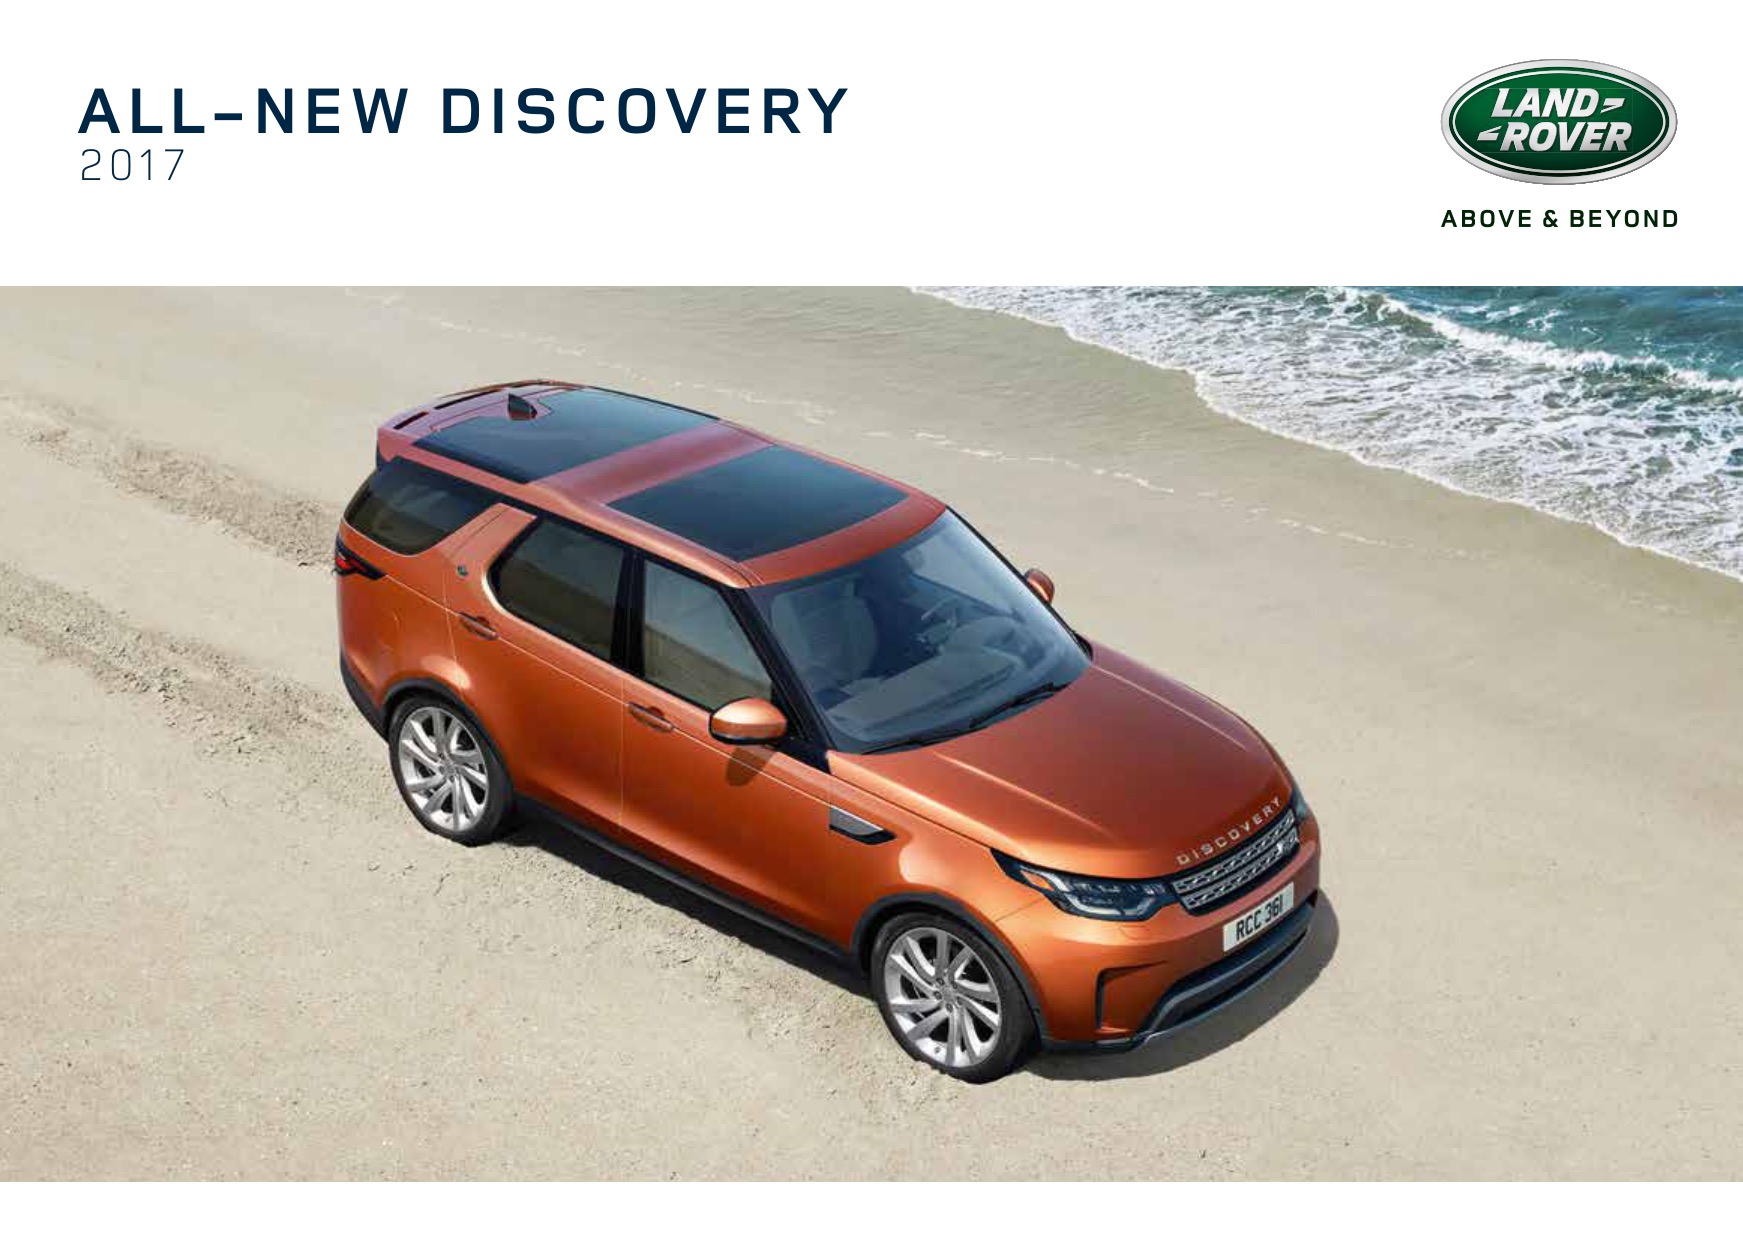 2017 Land Rover Discovery Brochure Page 35